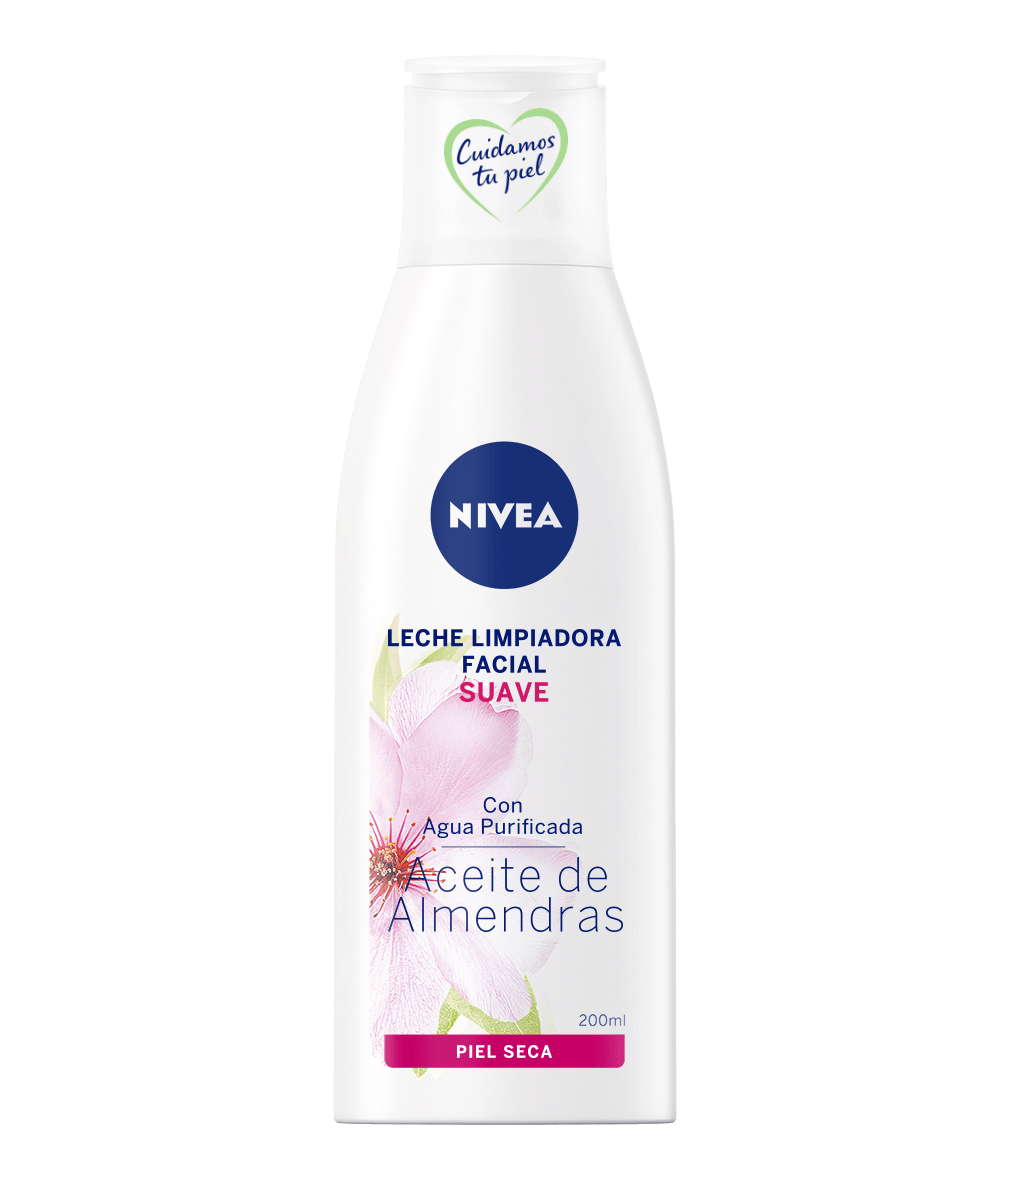 Gentle Cleansing Milk – Enriched with Almond Oil – NIVEA